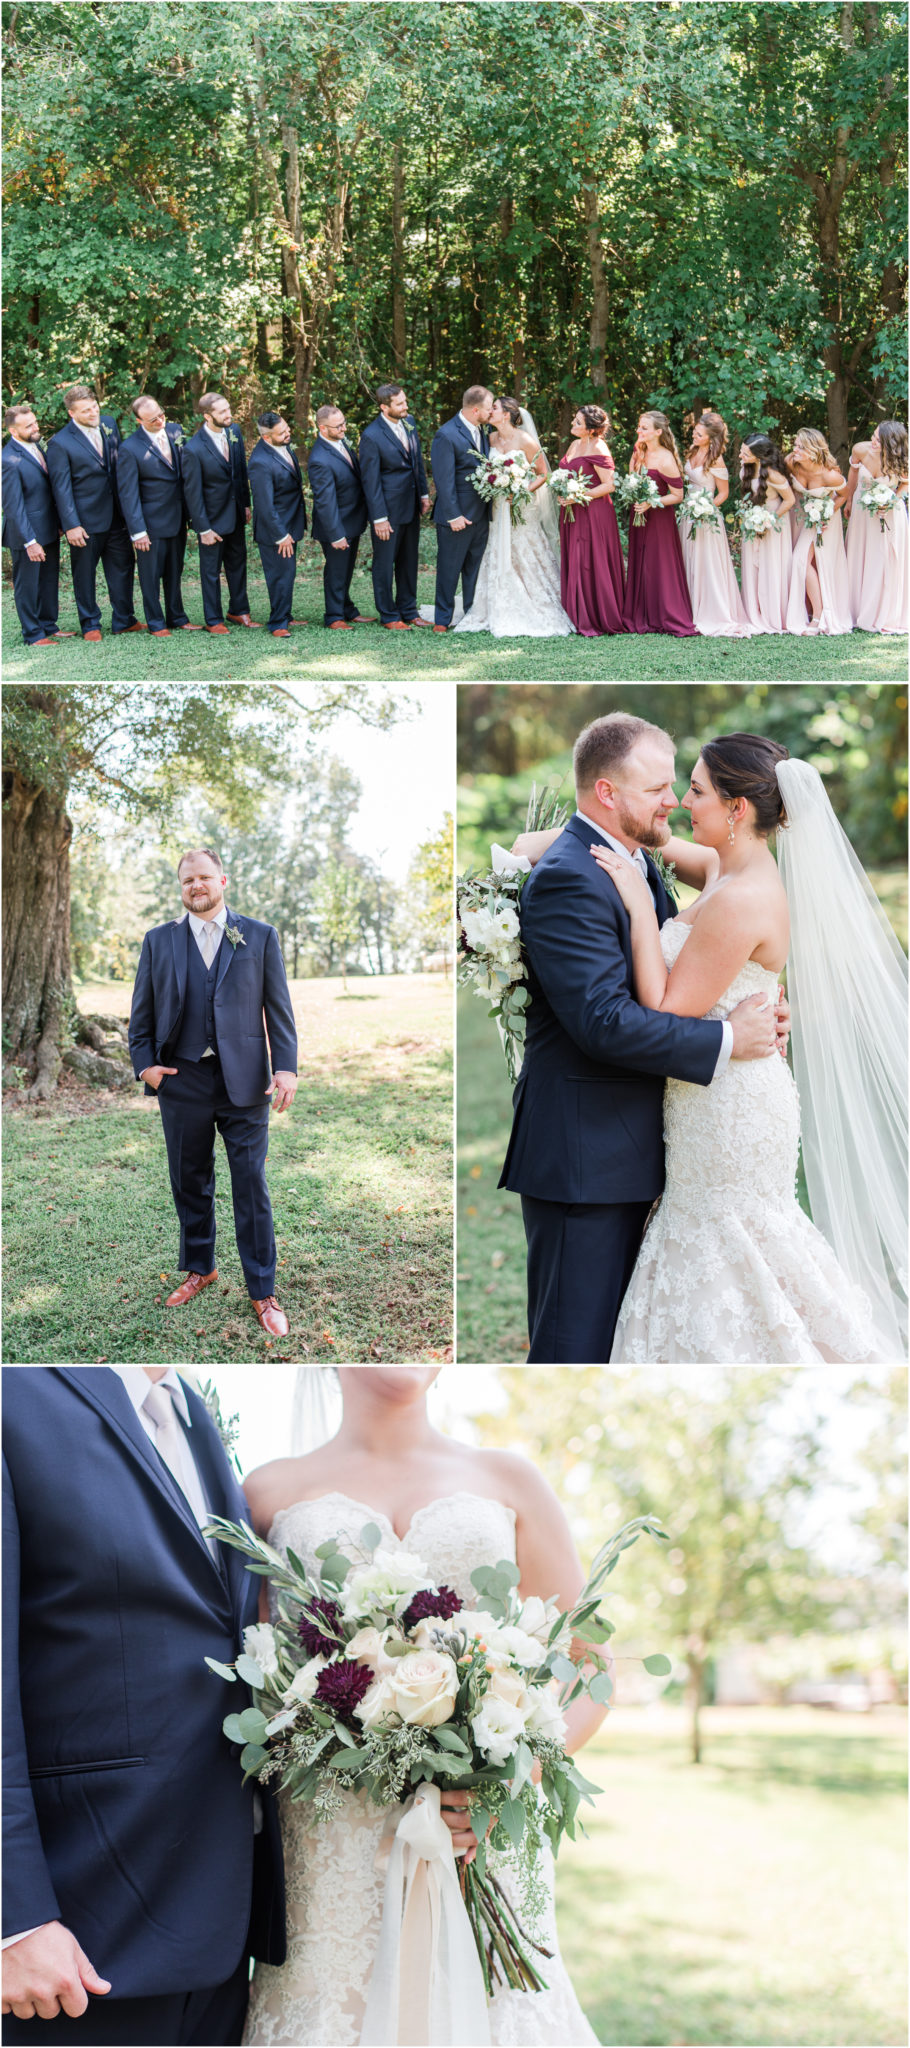 A Fall Vineyard Wedding at Cityscape Winery in Pelter, SC Bridal Party Photos